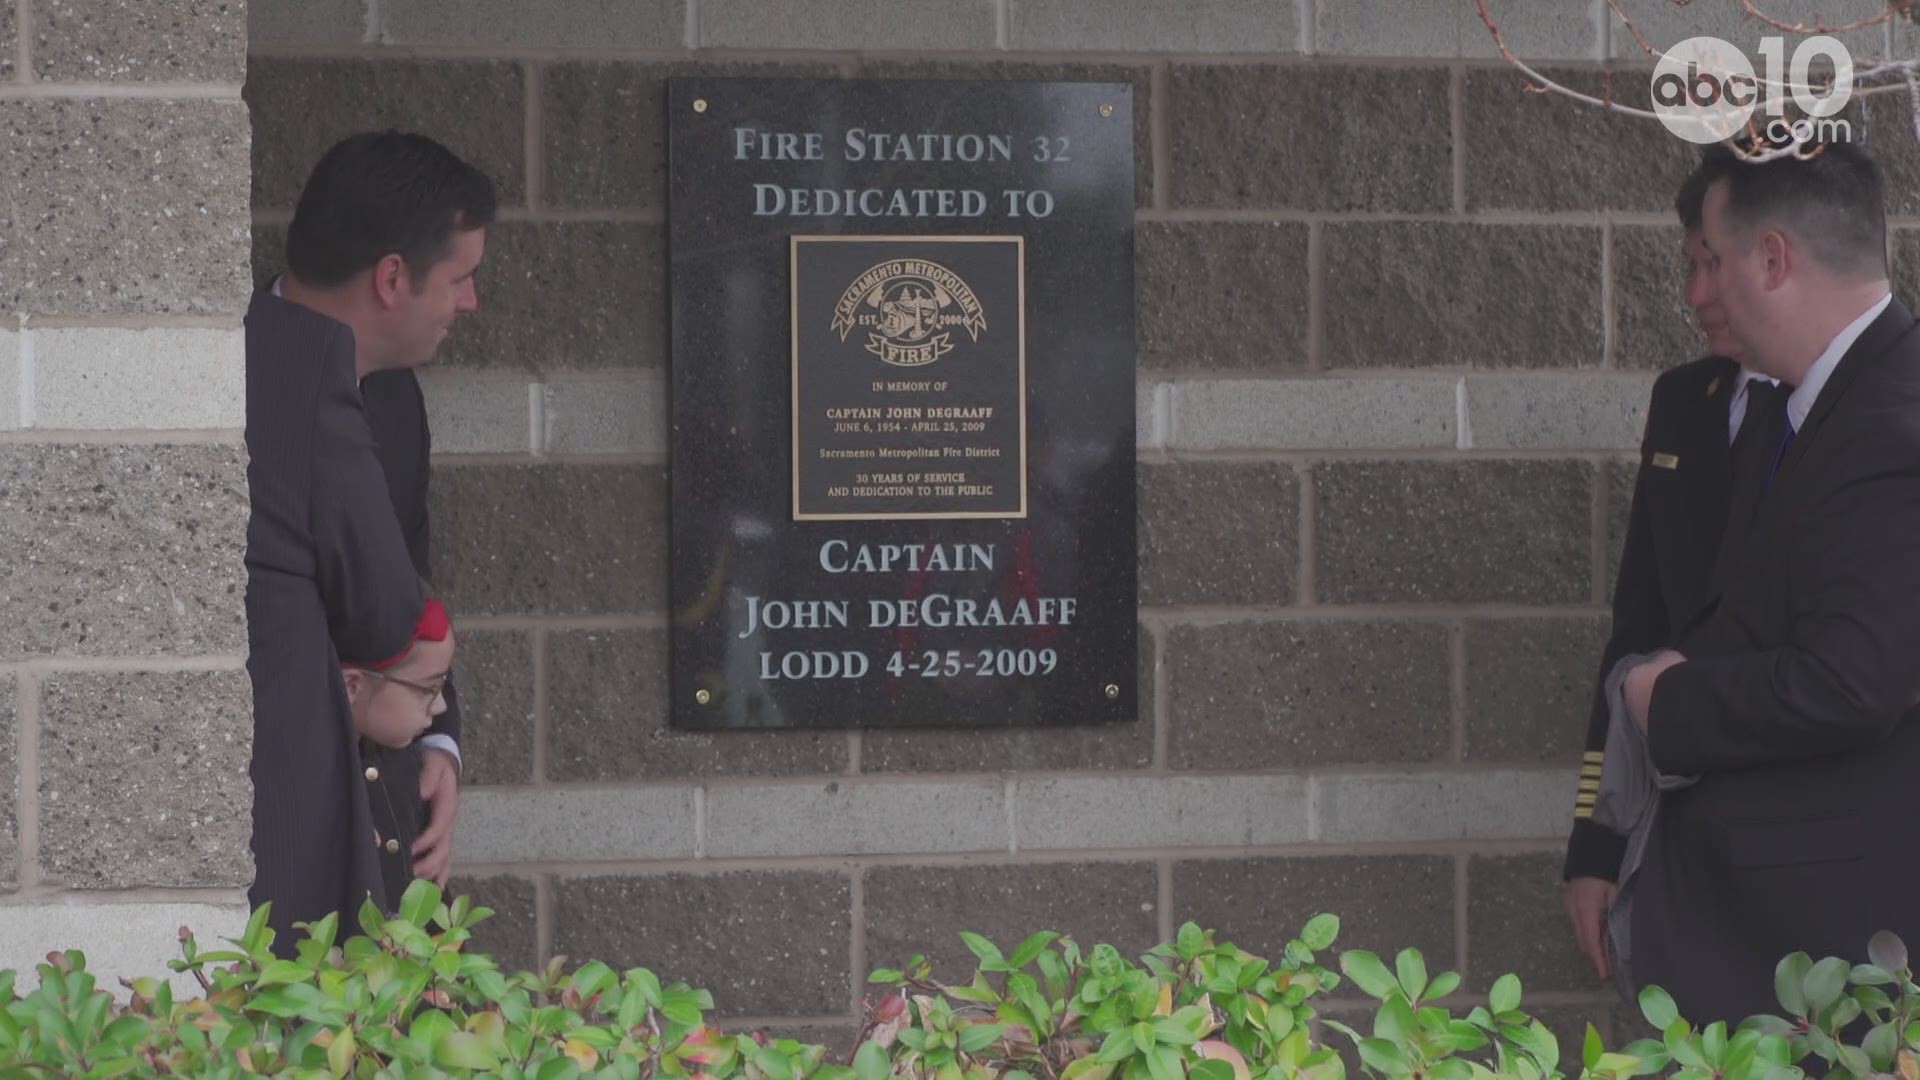 At a ceremony Monday, officials dedicated Fire Station 32 in Fair Oaks to Capt. John de Graaff. ABC10 Photojournalist Mike Garza covered the event.